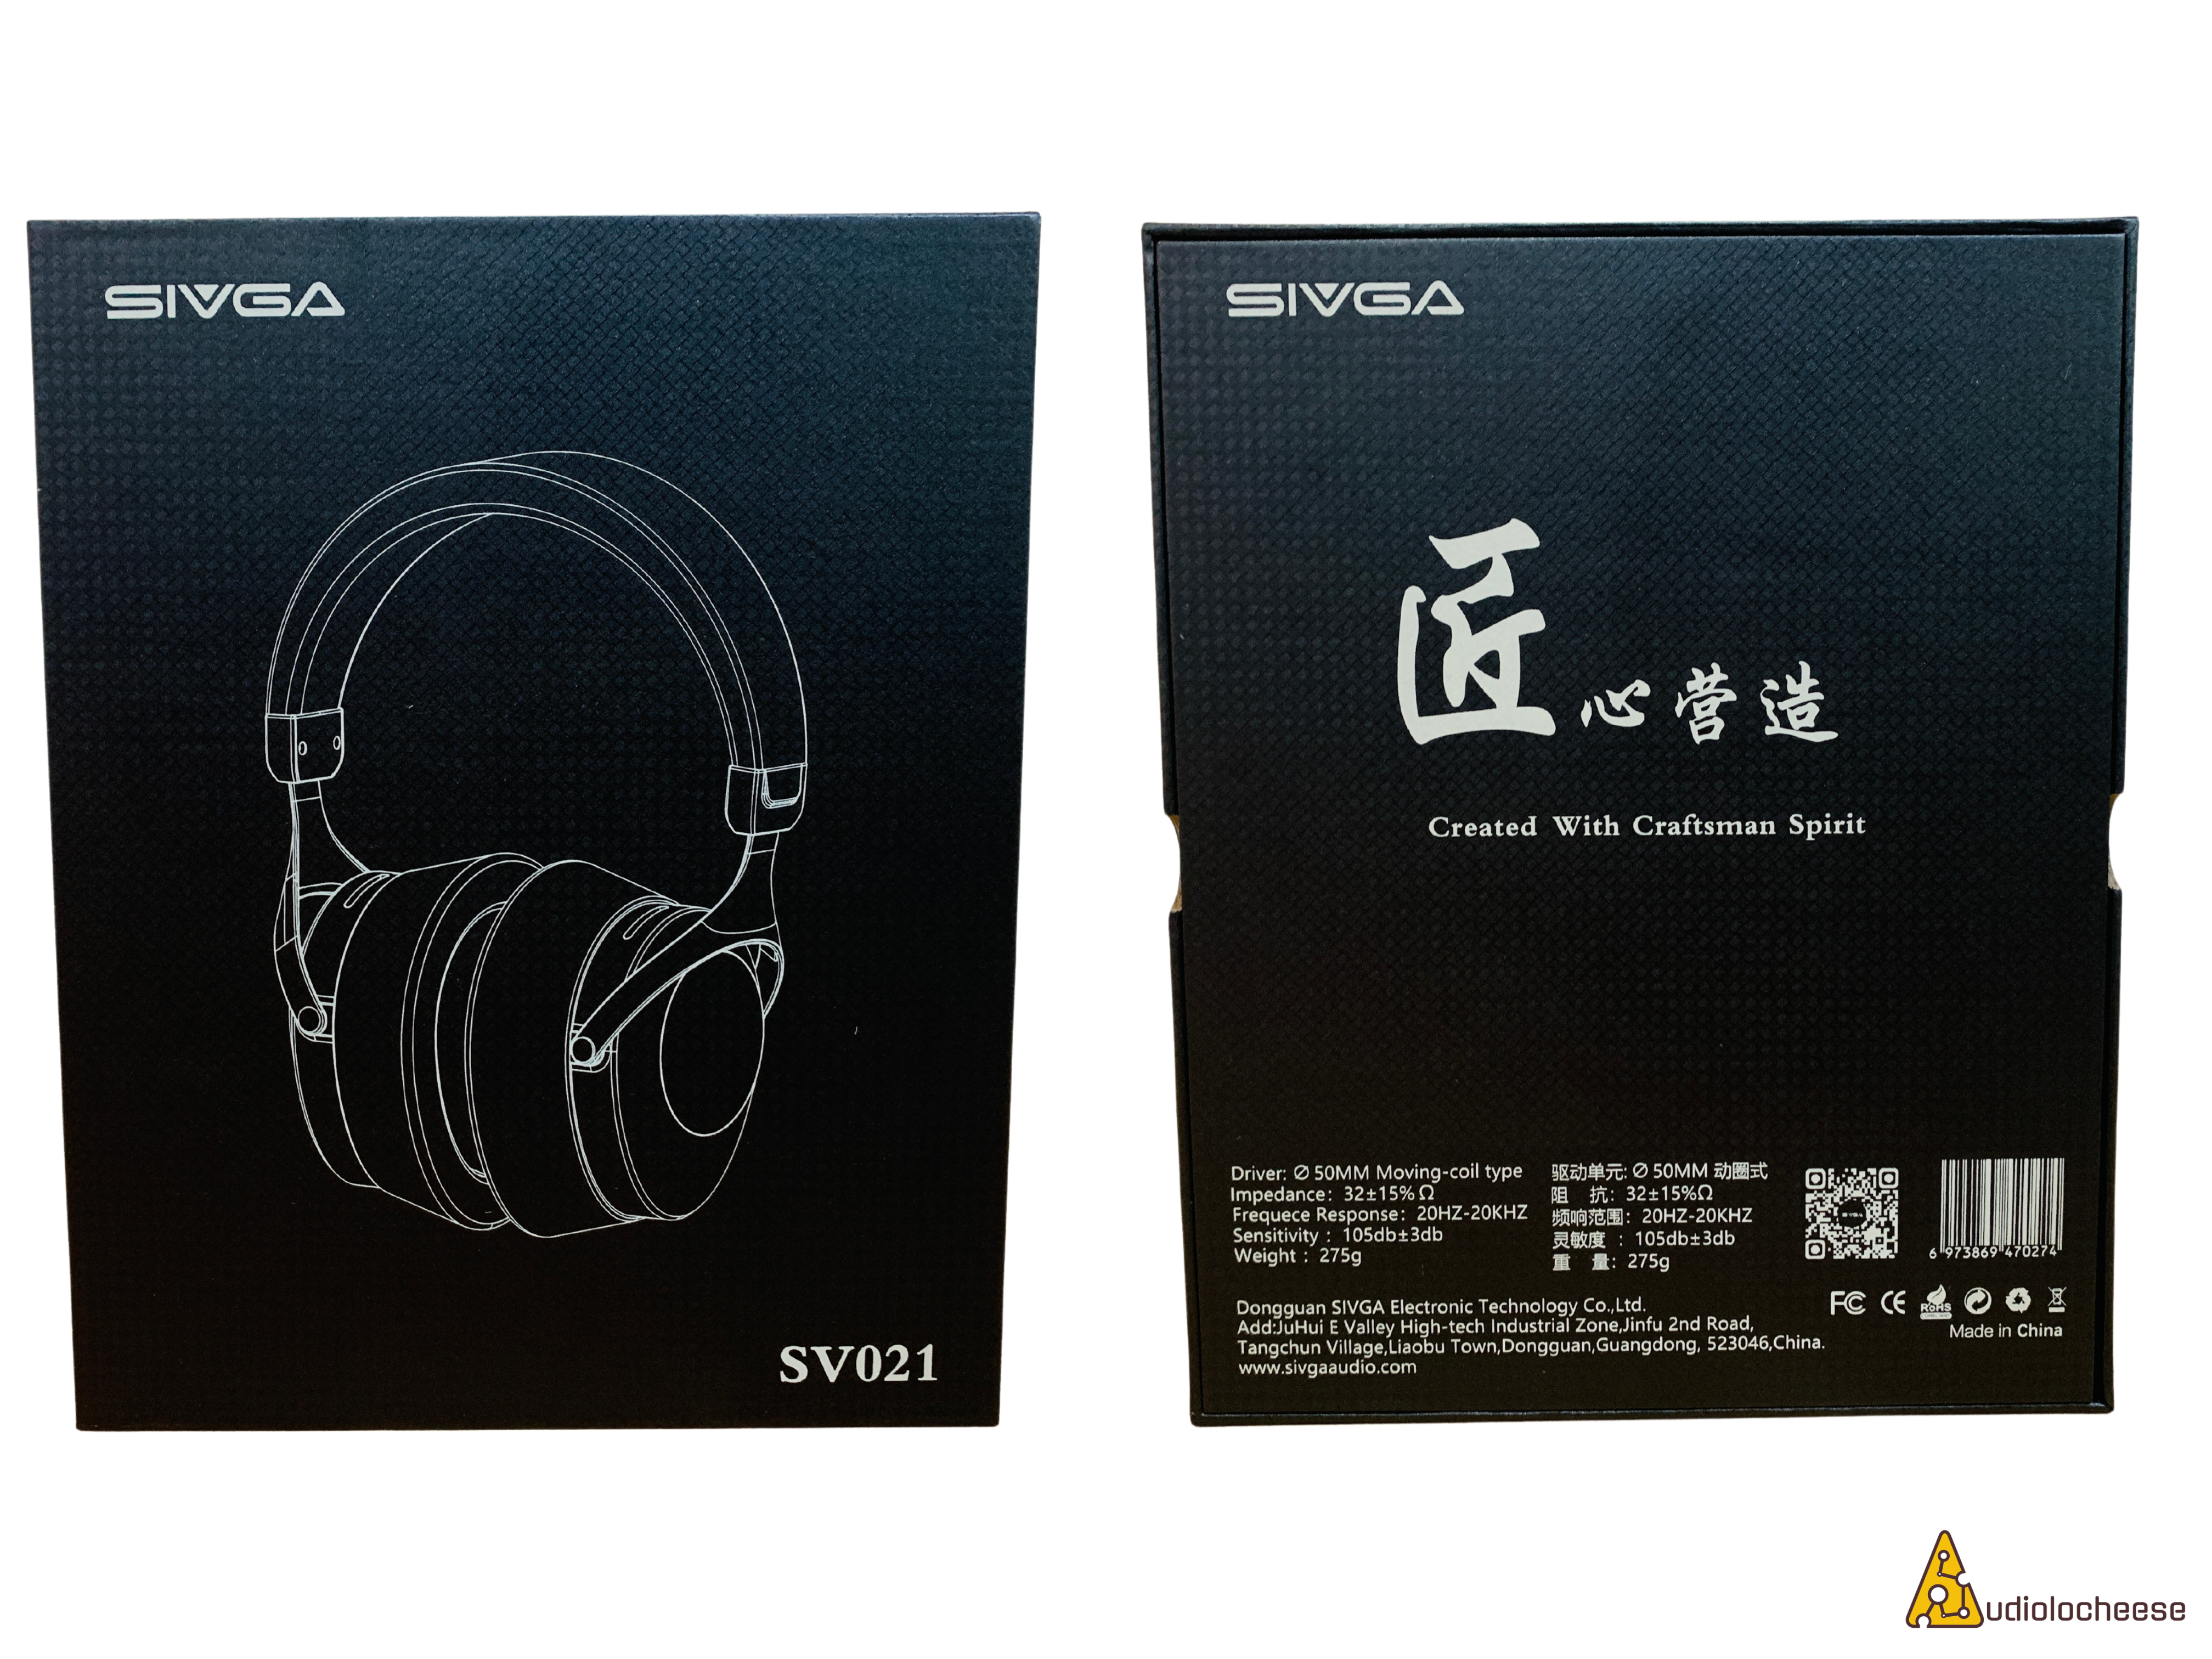 The headphones are well-packaged in a black box, with brand, model number, and technical specifications clearly printed.